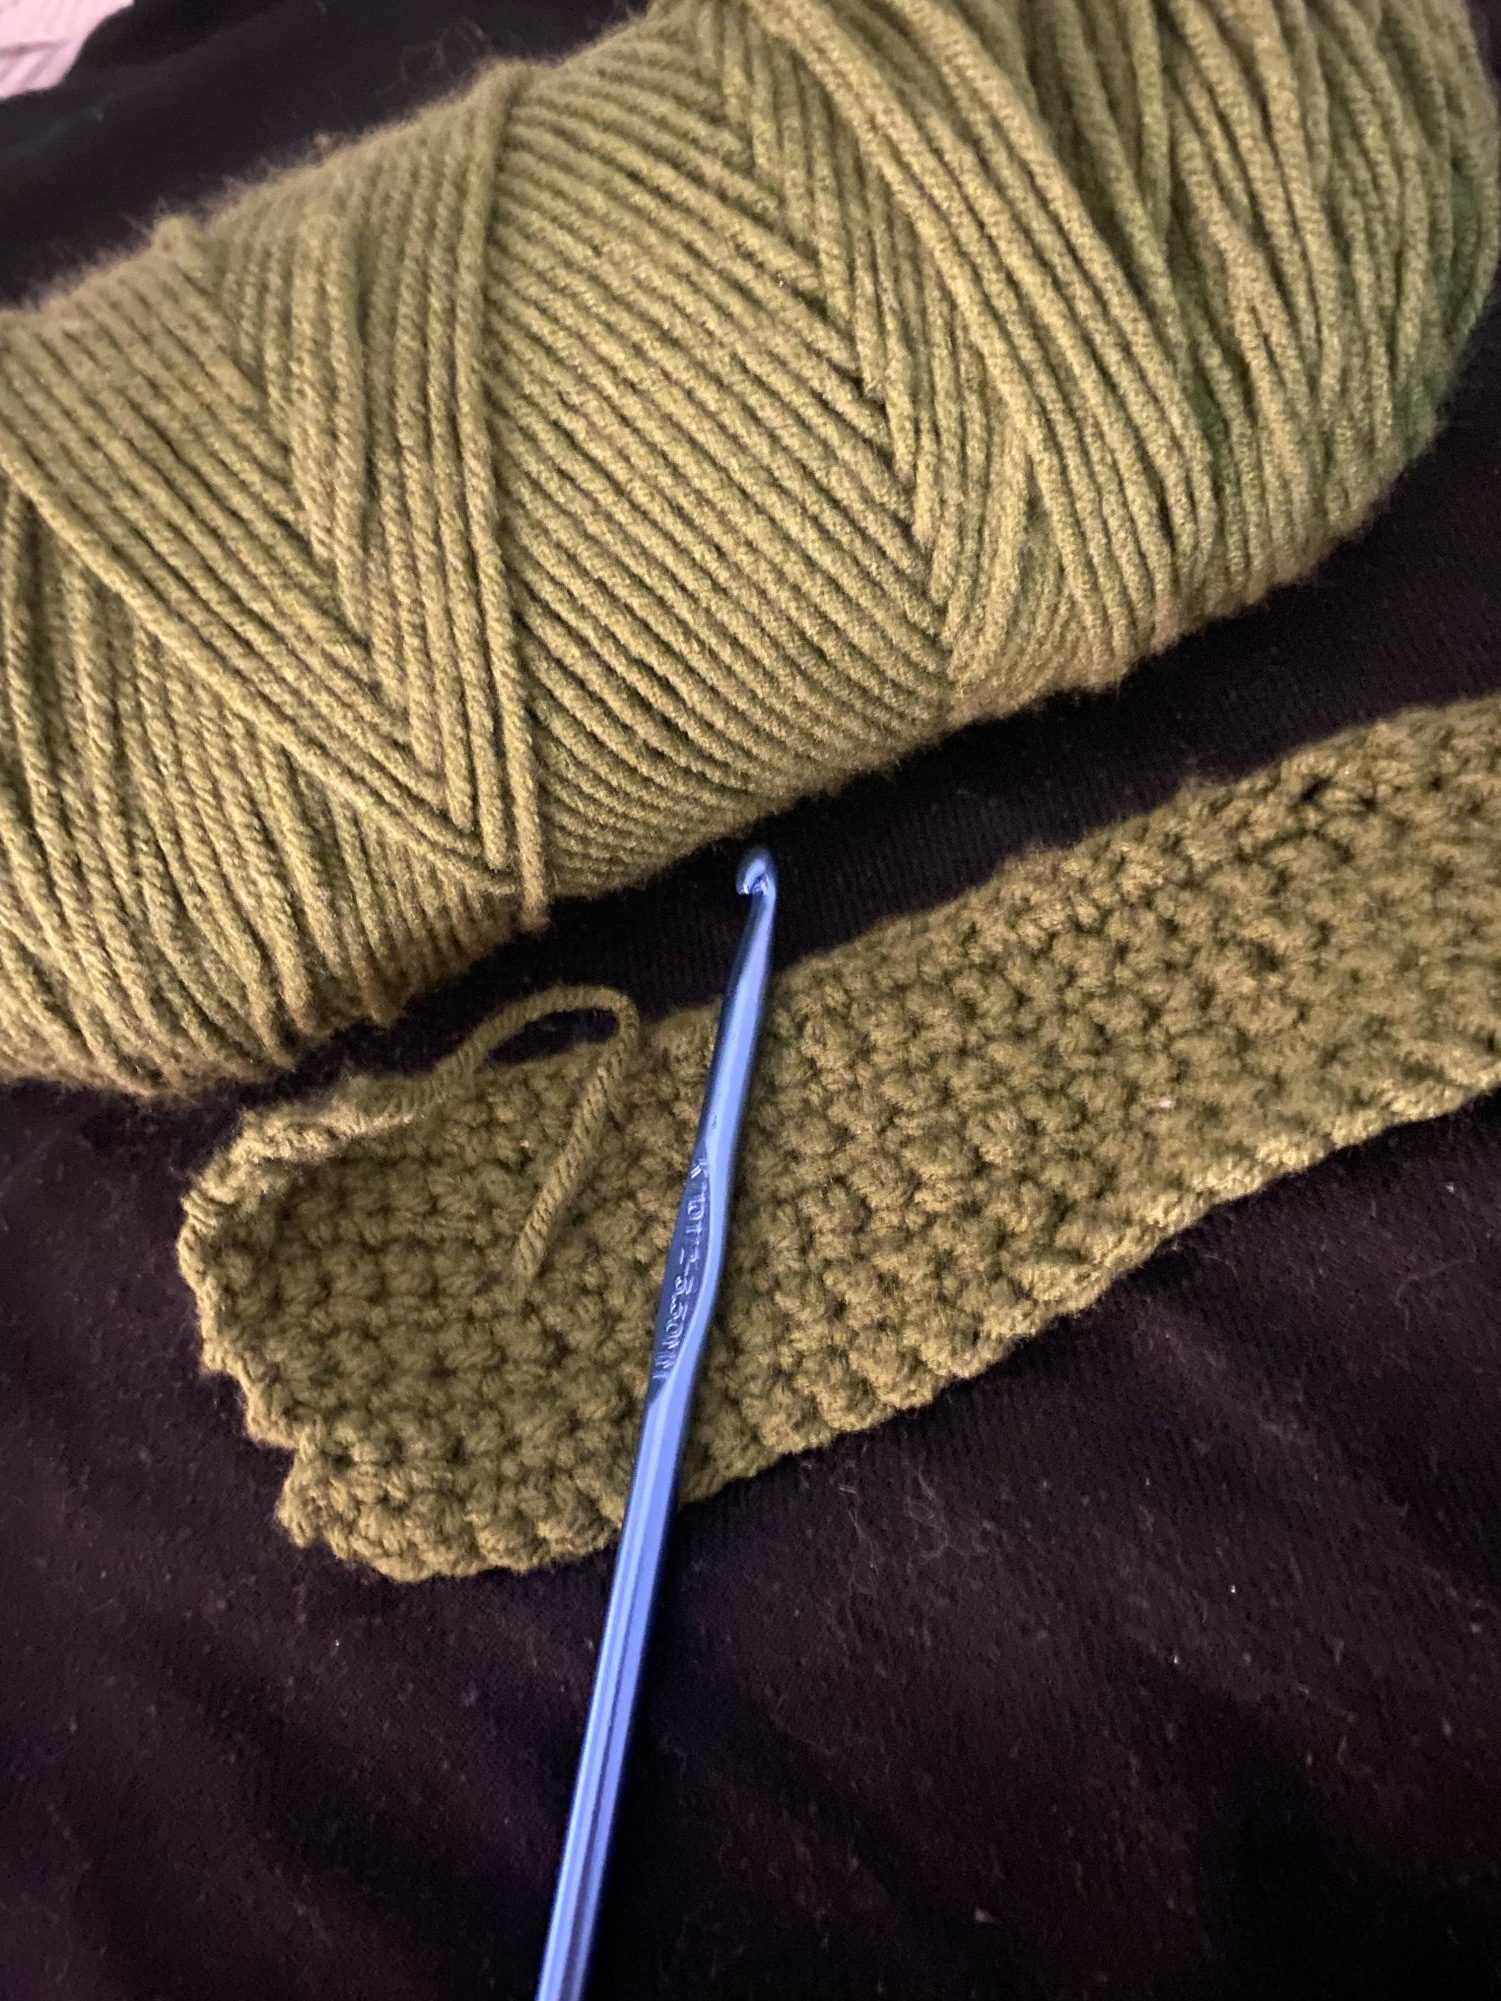 The Art of Crocheting! – The Tribe